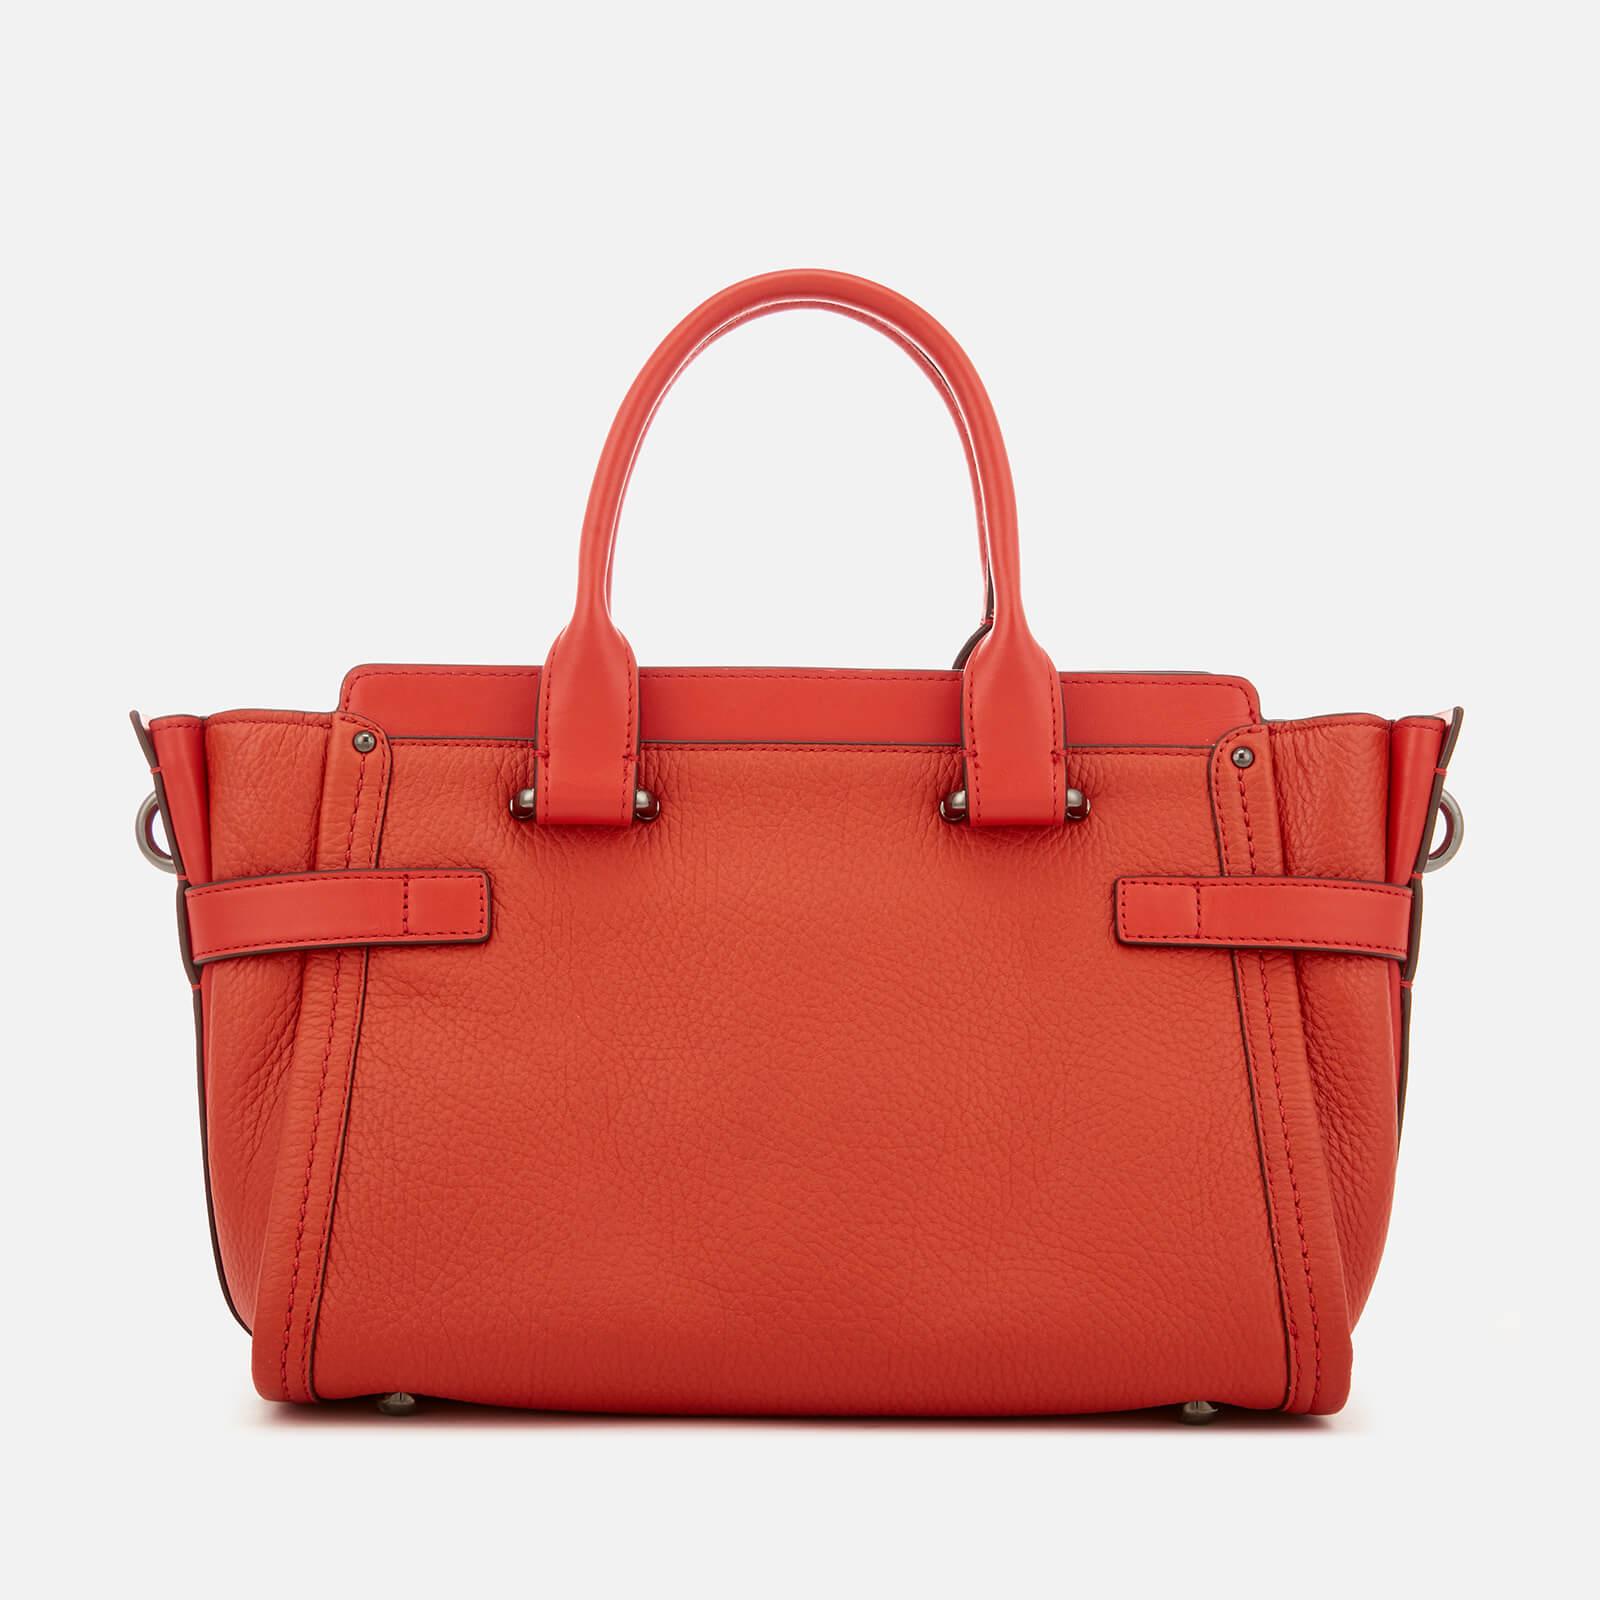 COACH Swagger 27 Tote Bag in Orange - Lyst